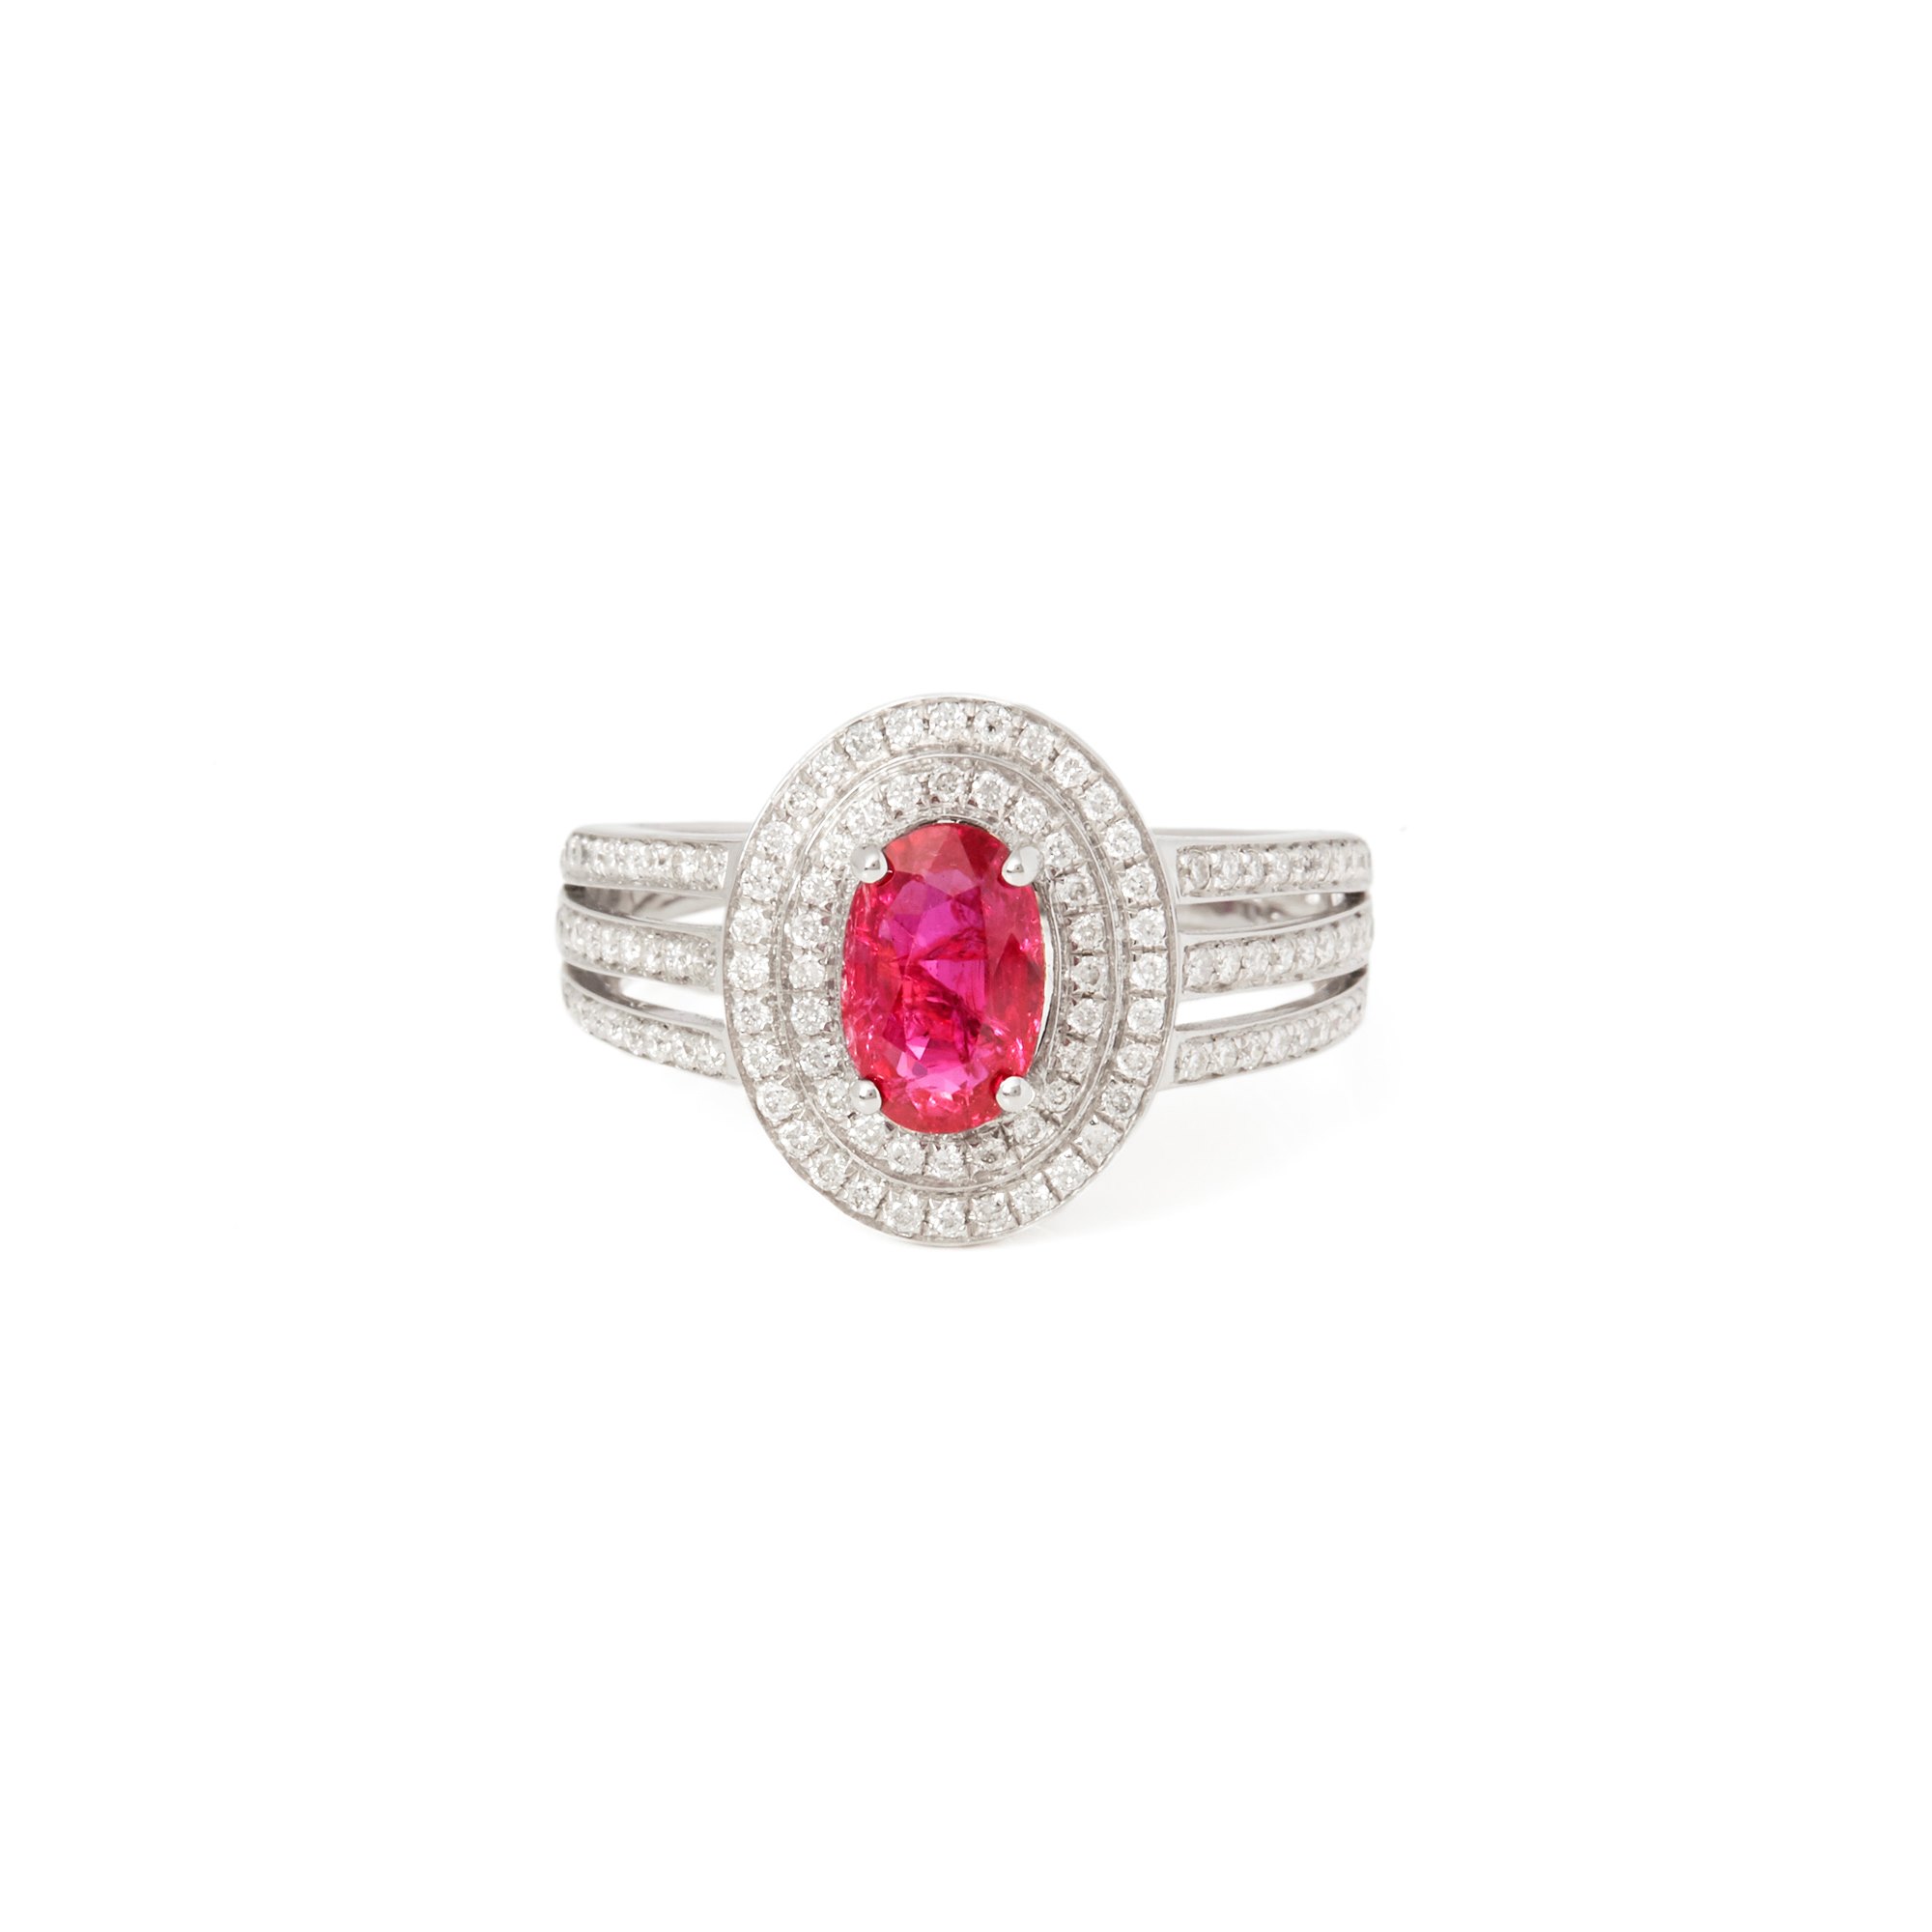 David Jerome Certified 1.09ct Untreated Burmese Oval Cut Ruby and Diamond 18ct gold Ring